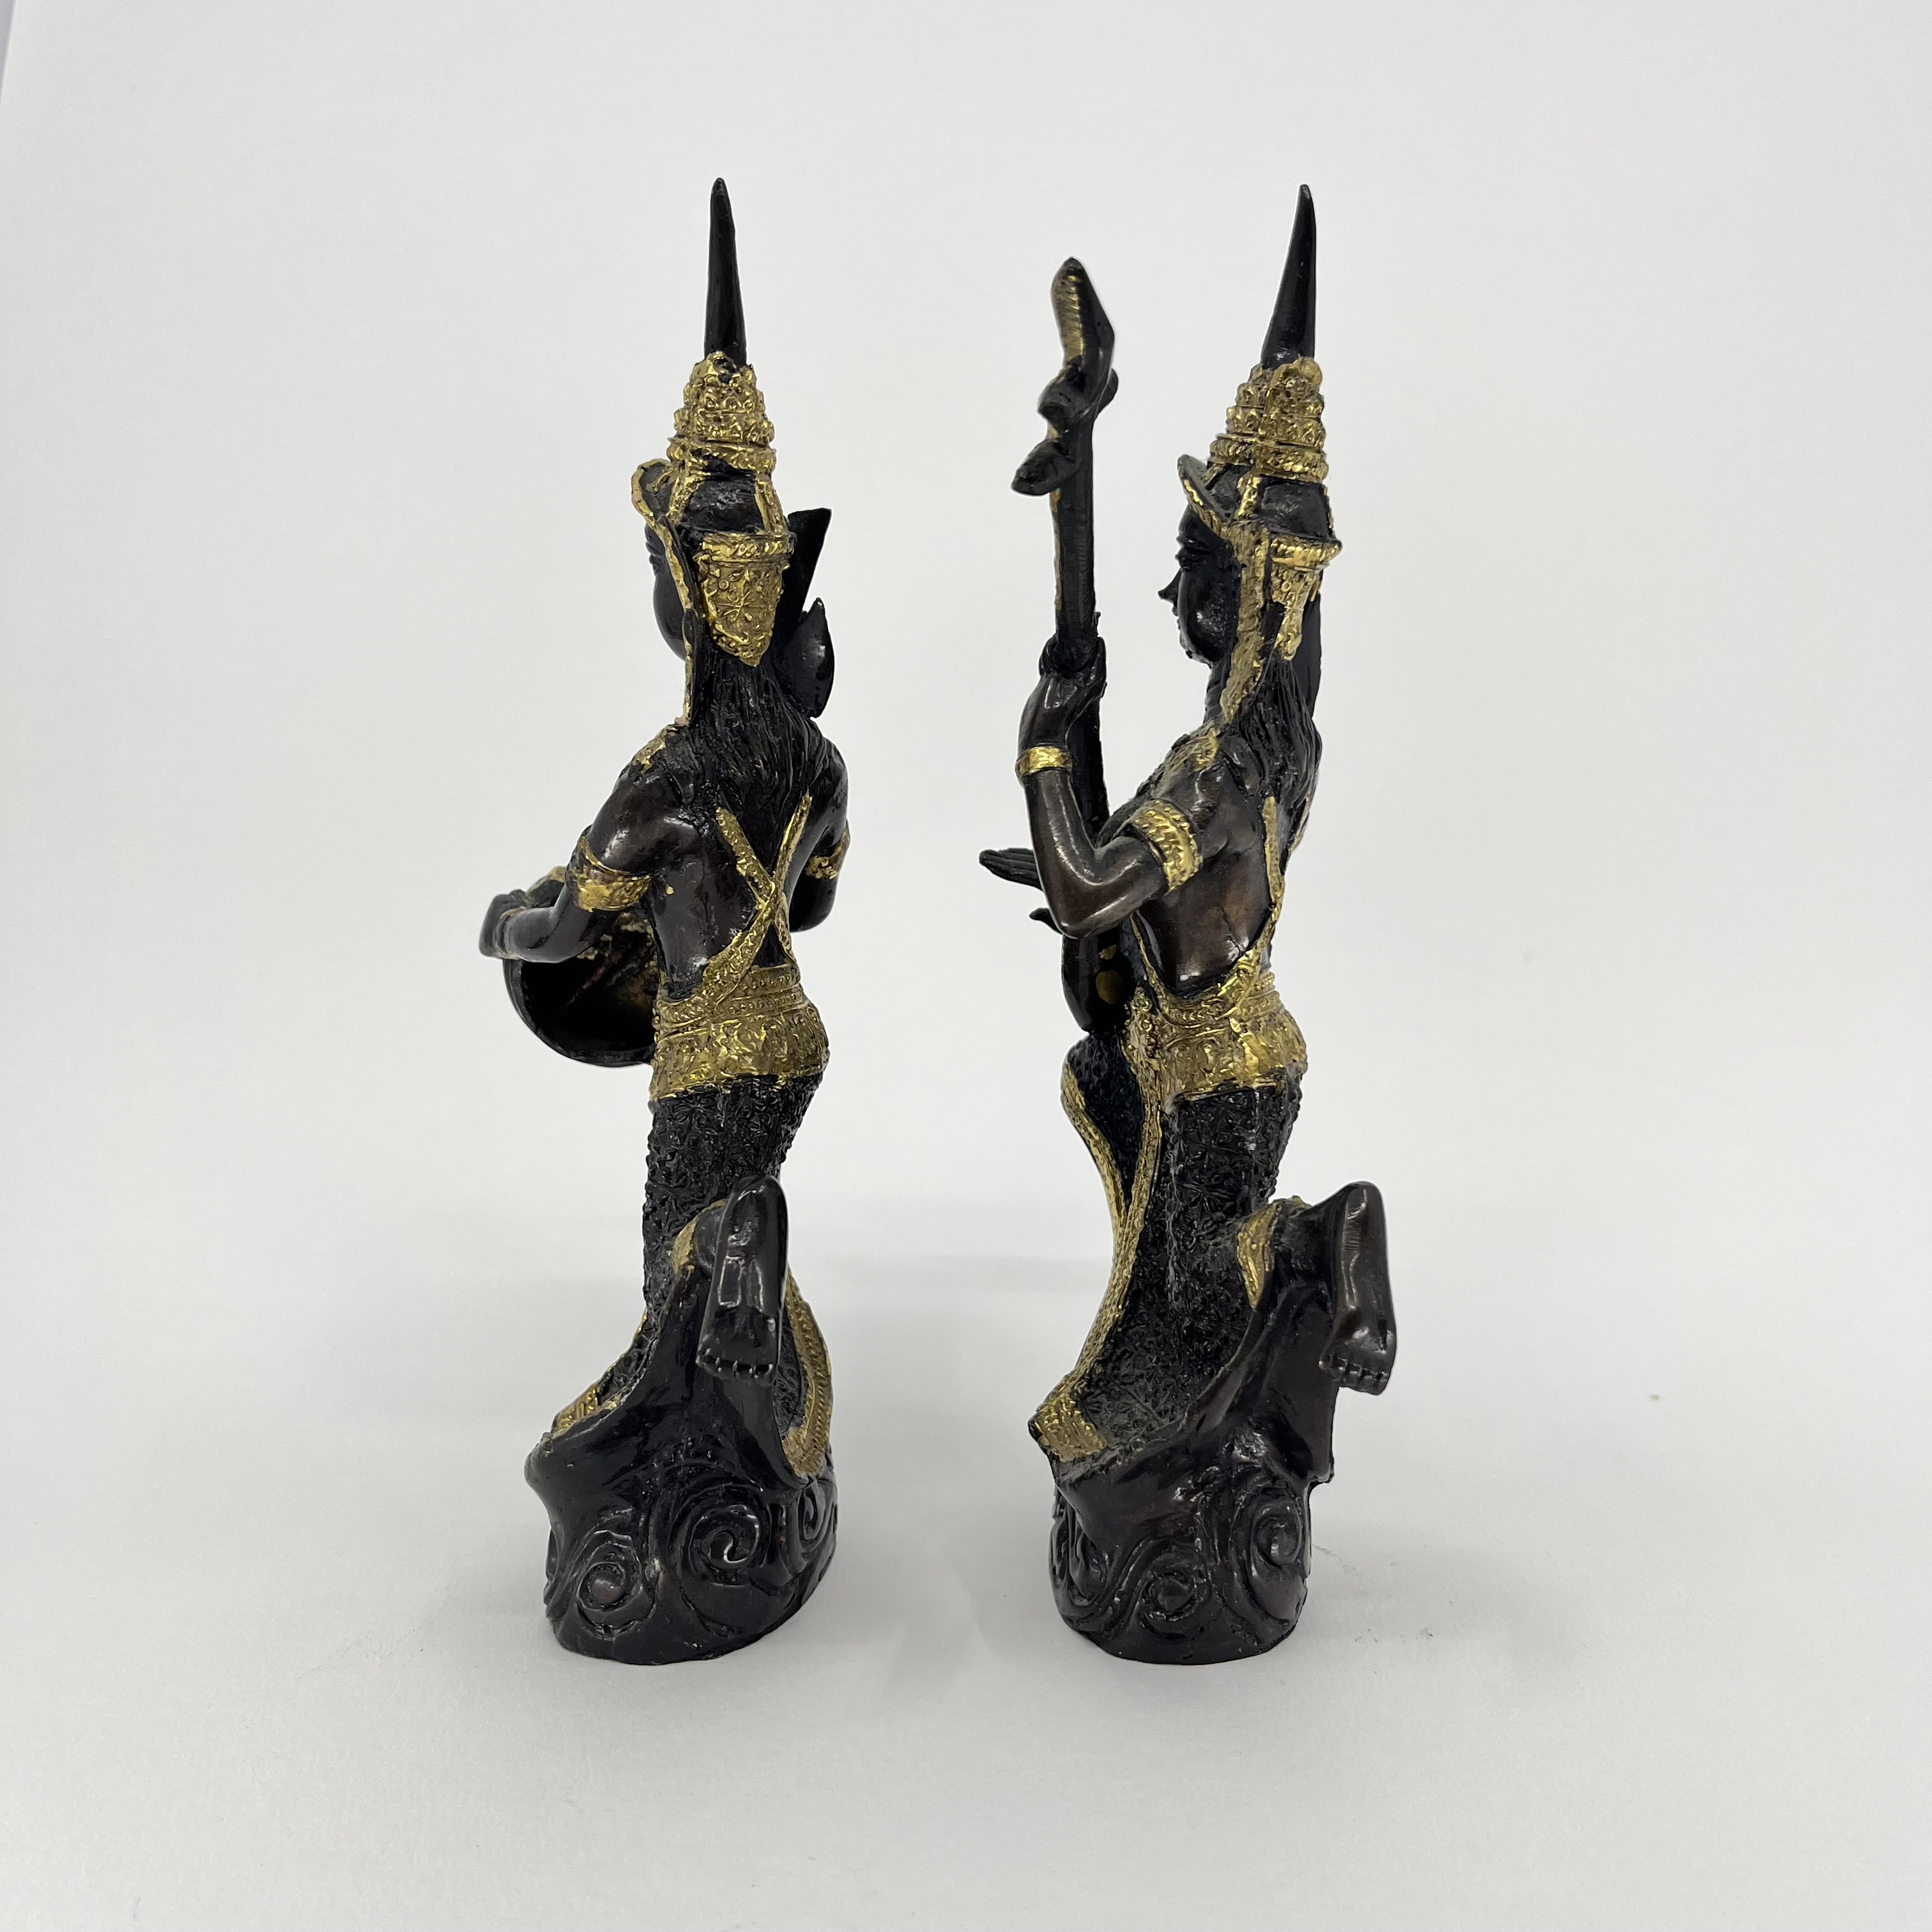 A Pair of Gilded Bronze Thai Theppanom Angel Temple Musician Figurines - Image 4 of 7